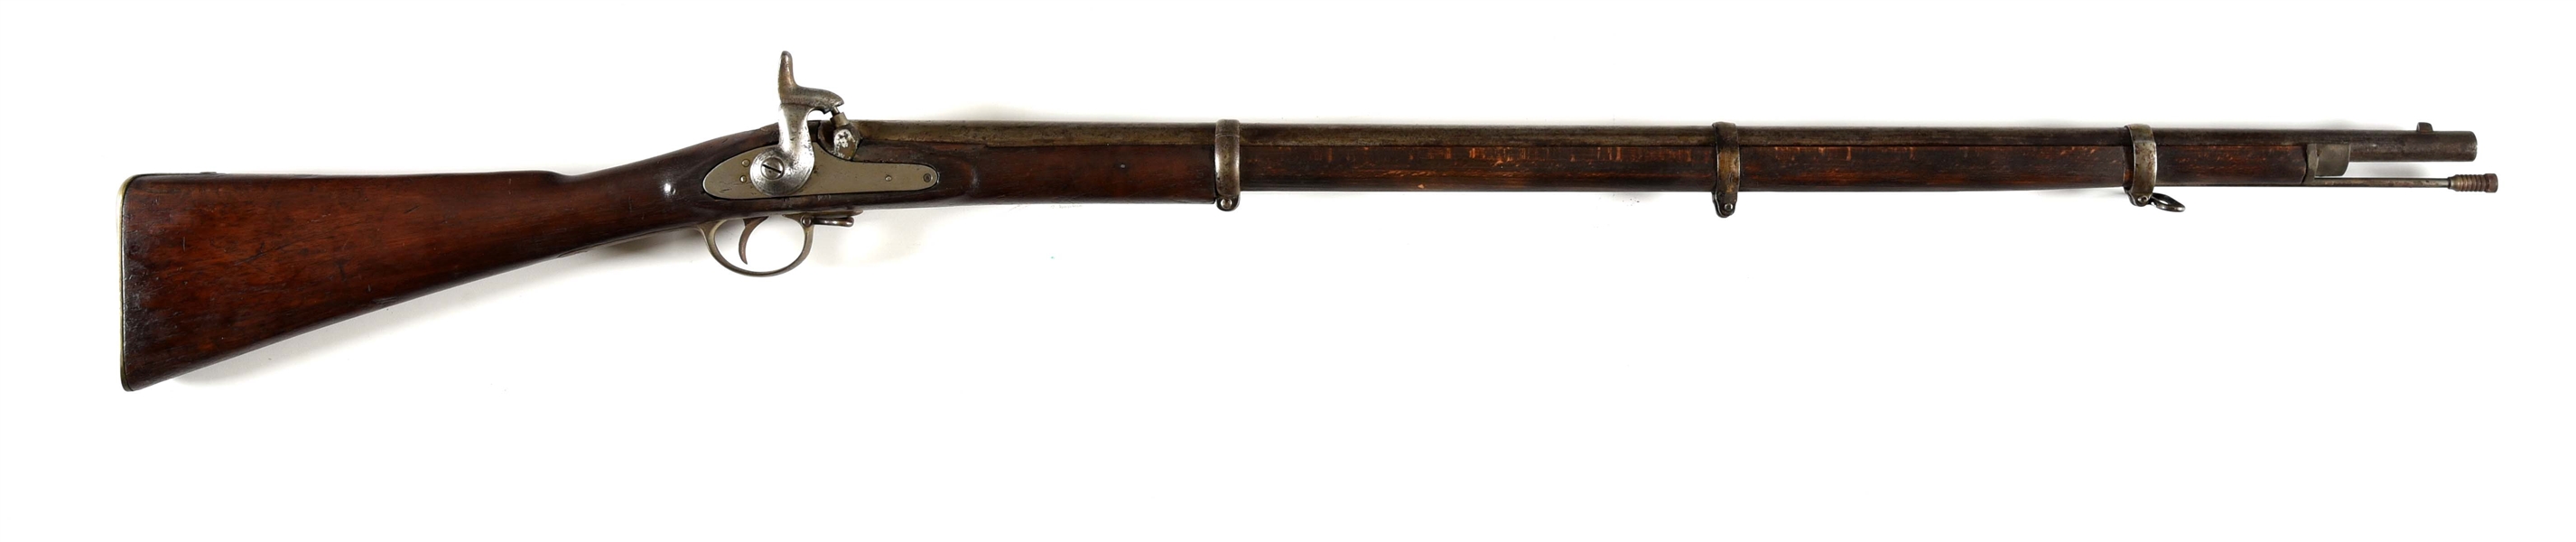 (A) ENFIELD P1853 PERCUSSION MUSKET.